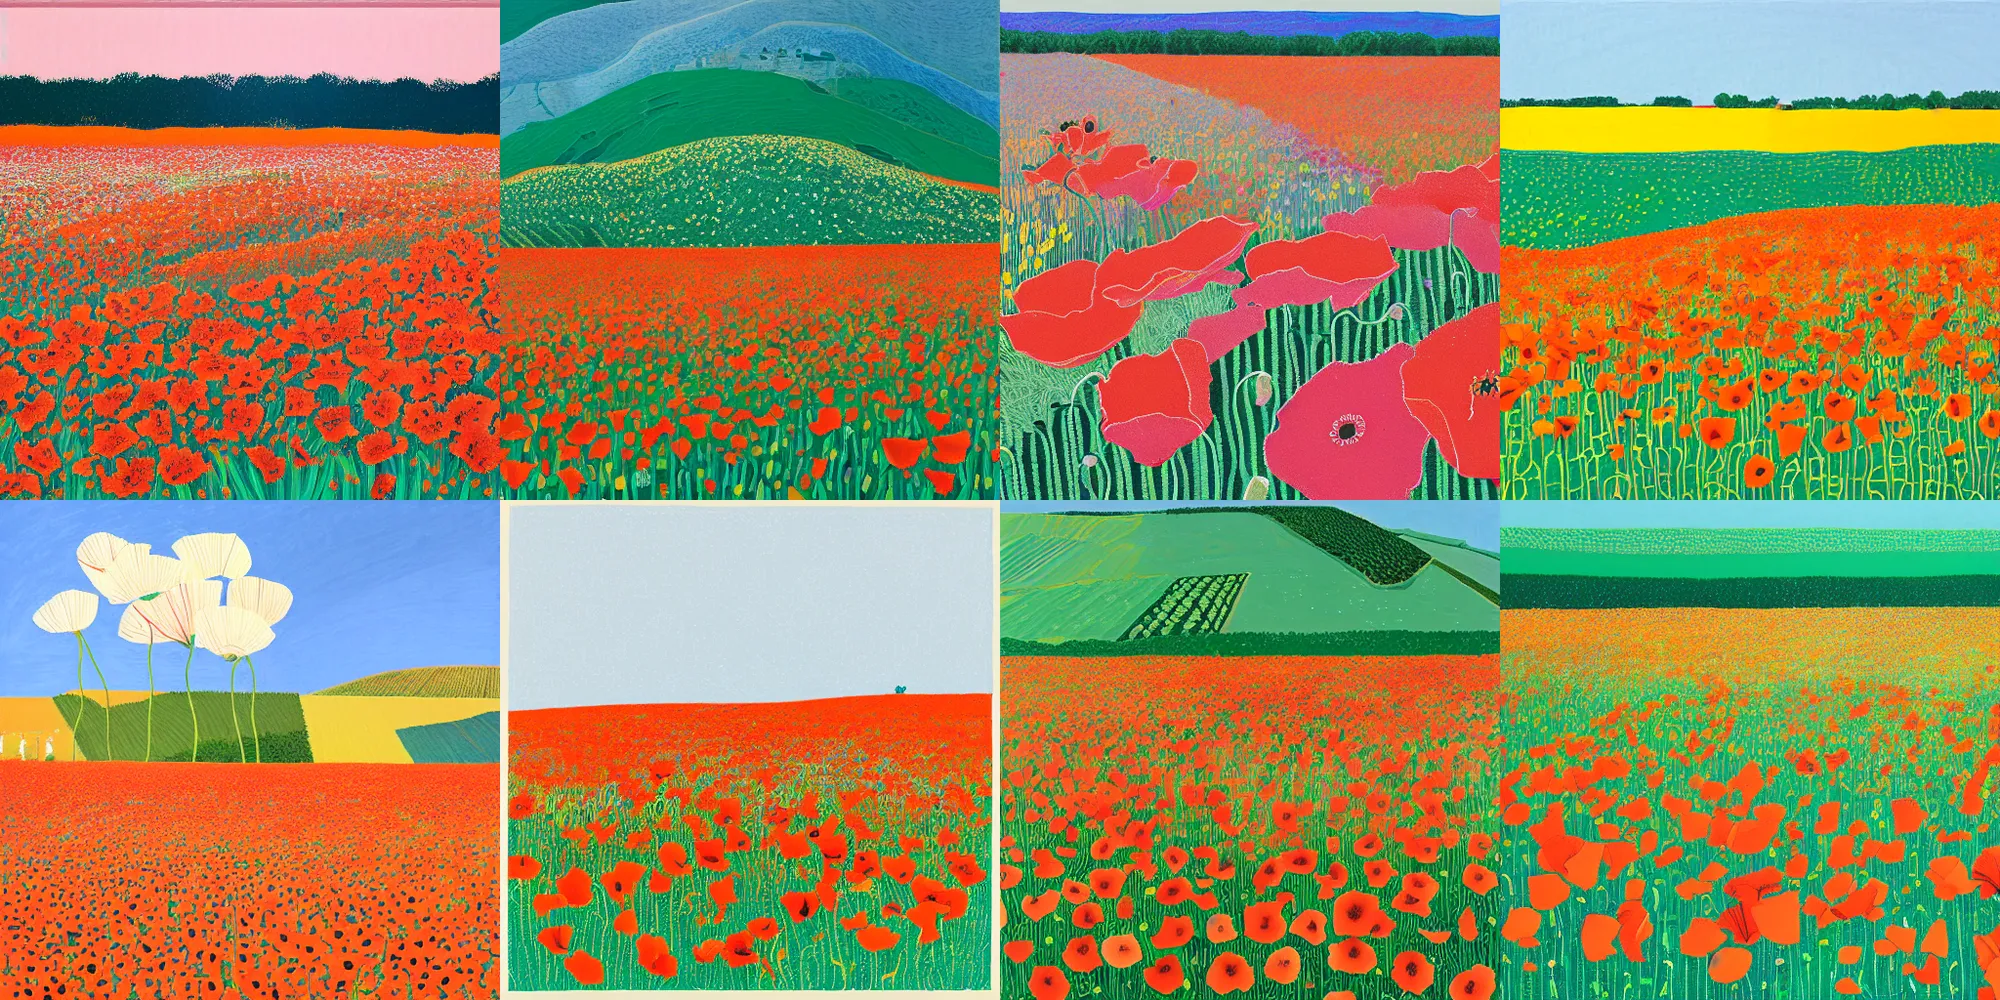 Prompt: field of poppy flowers by david hockney, victo ngai